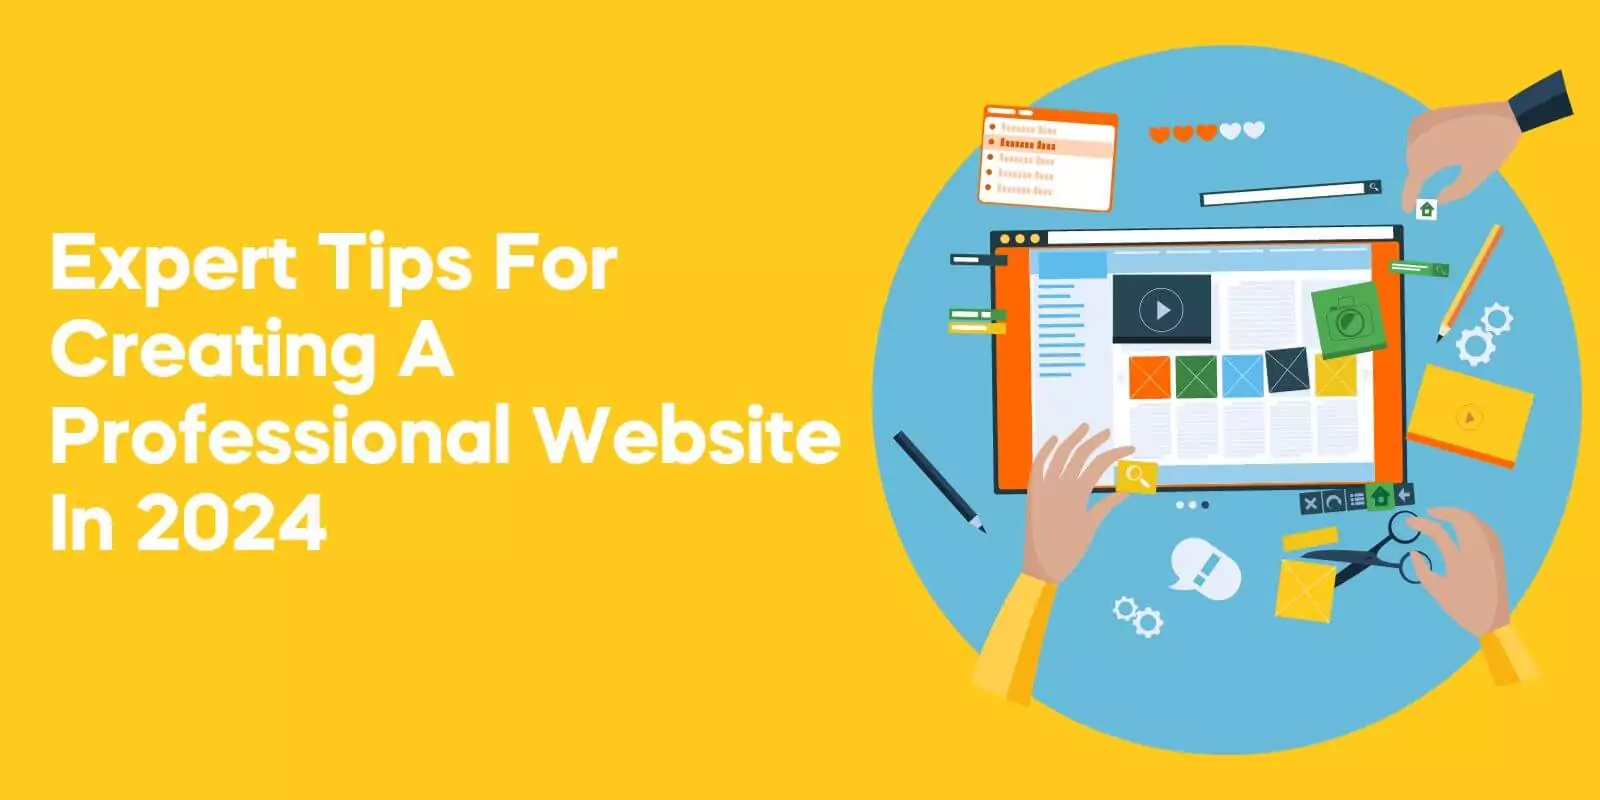 Expert Tips for Creating a Professional Website in 2024